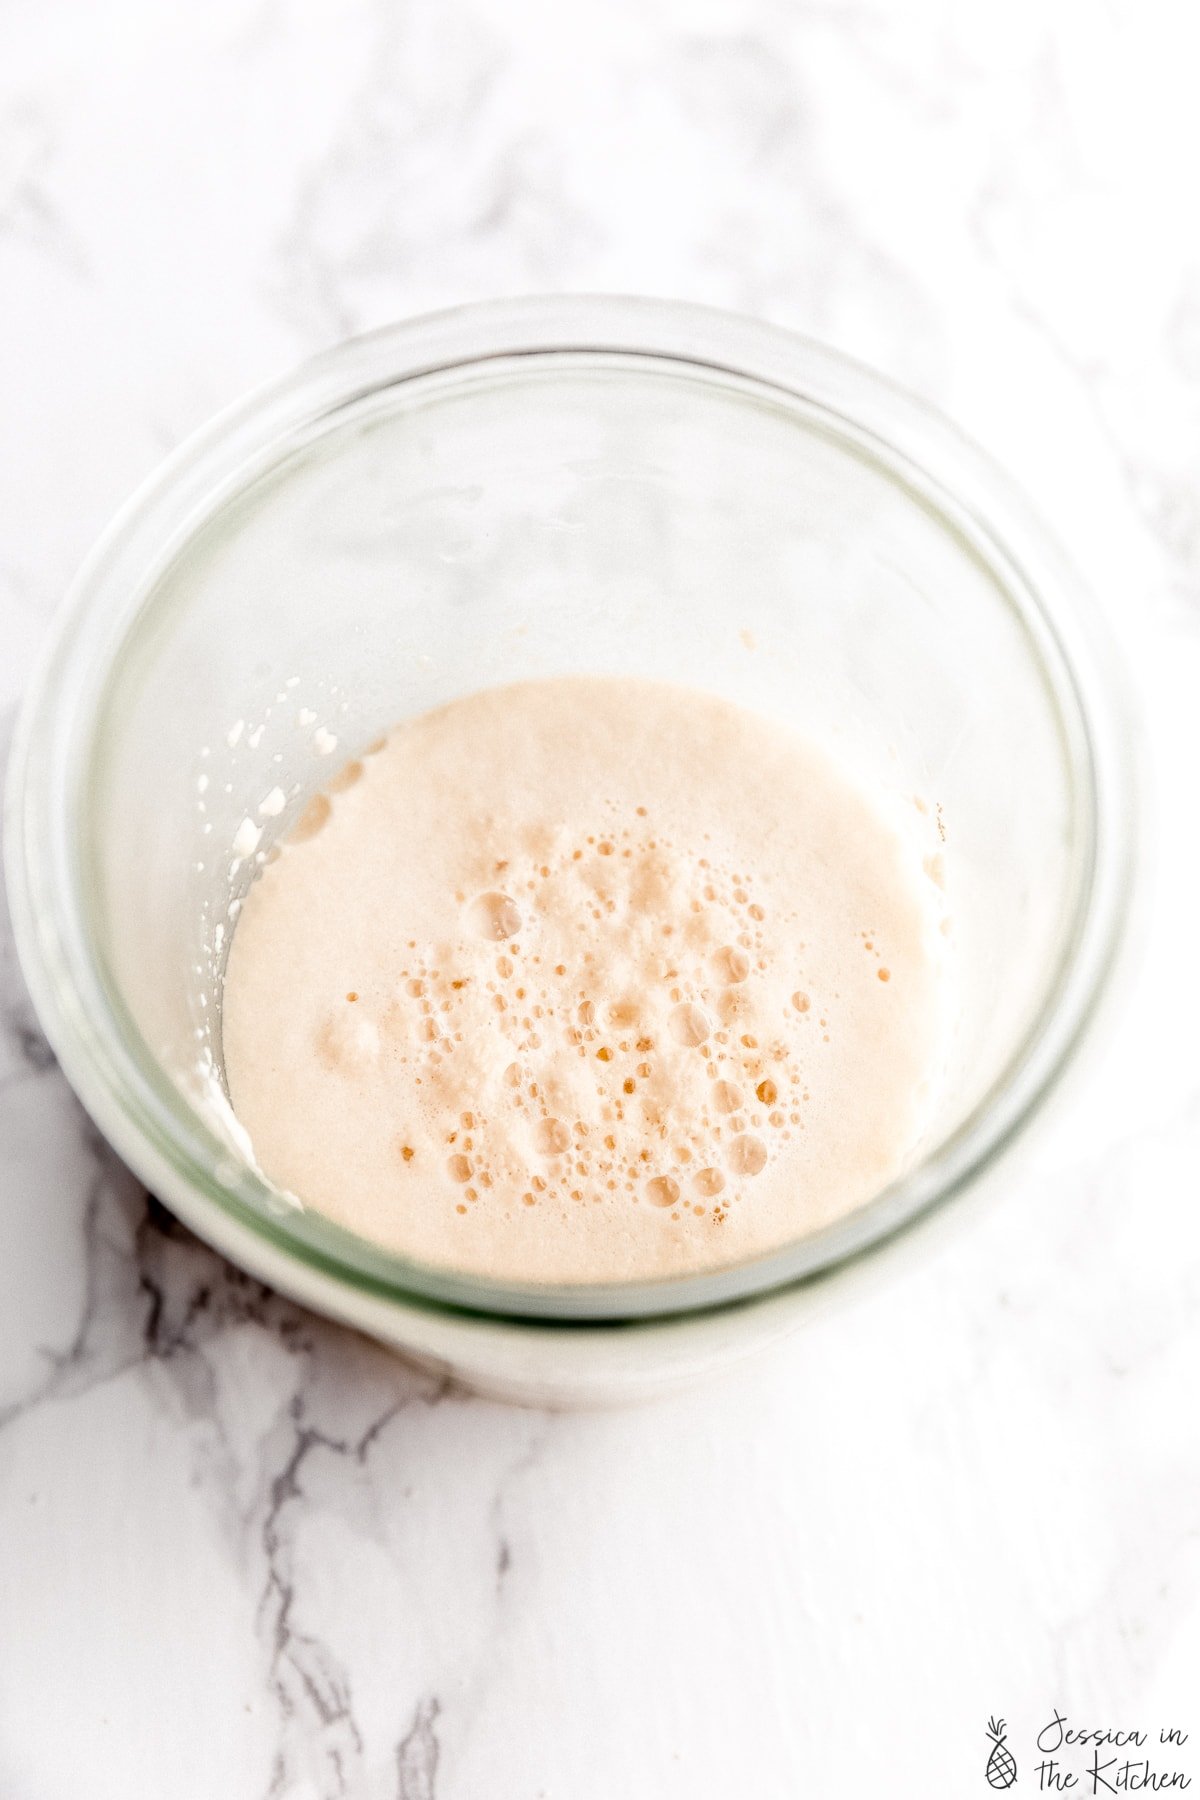 How to Test Yeast to see if it's still Good - Jessica in the Kitchen